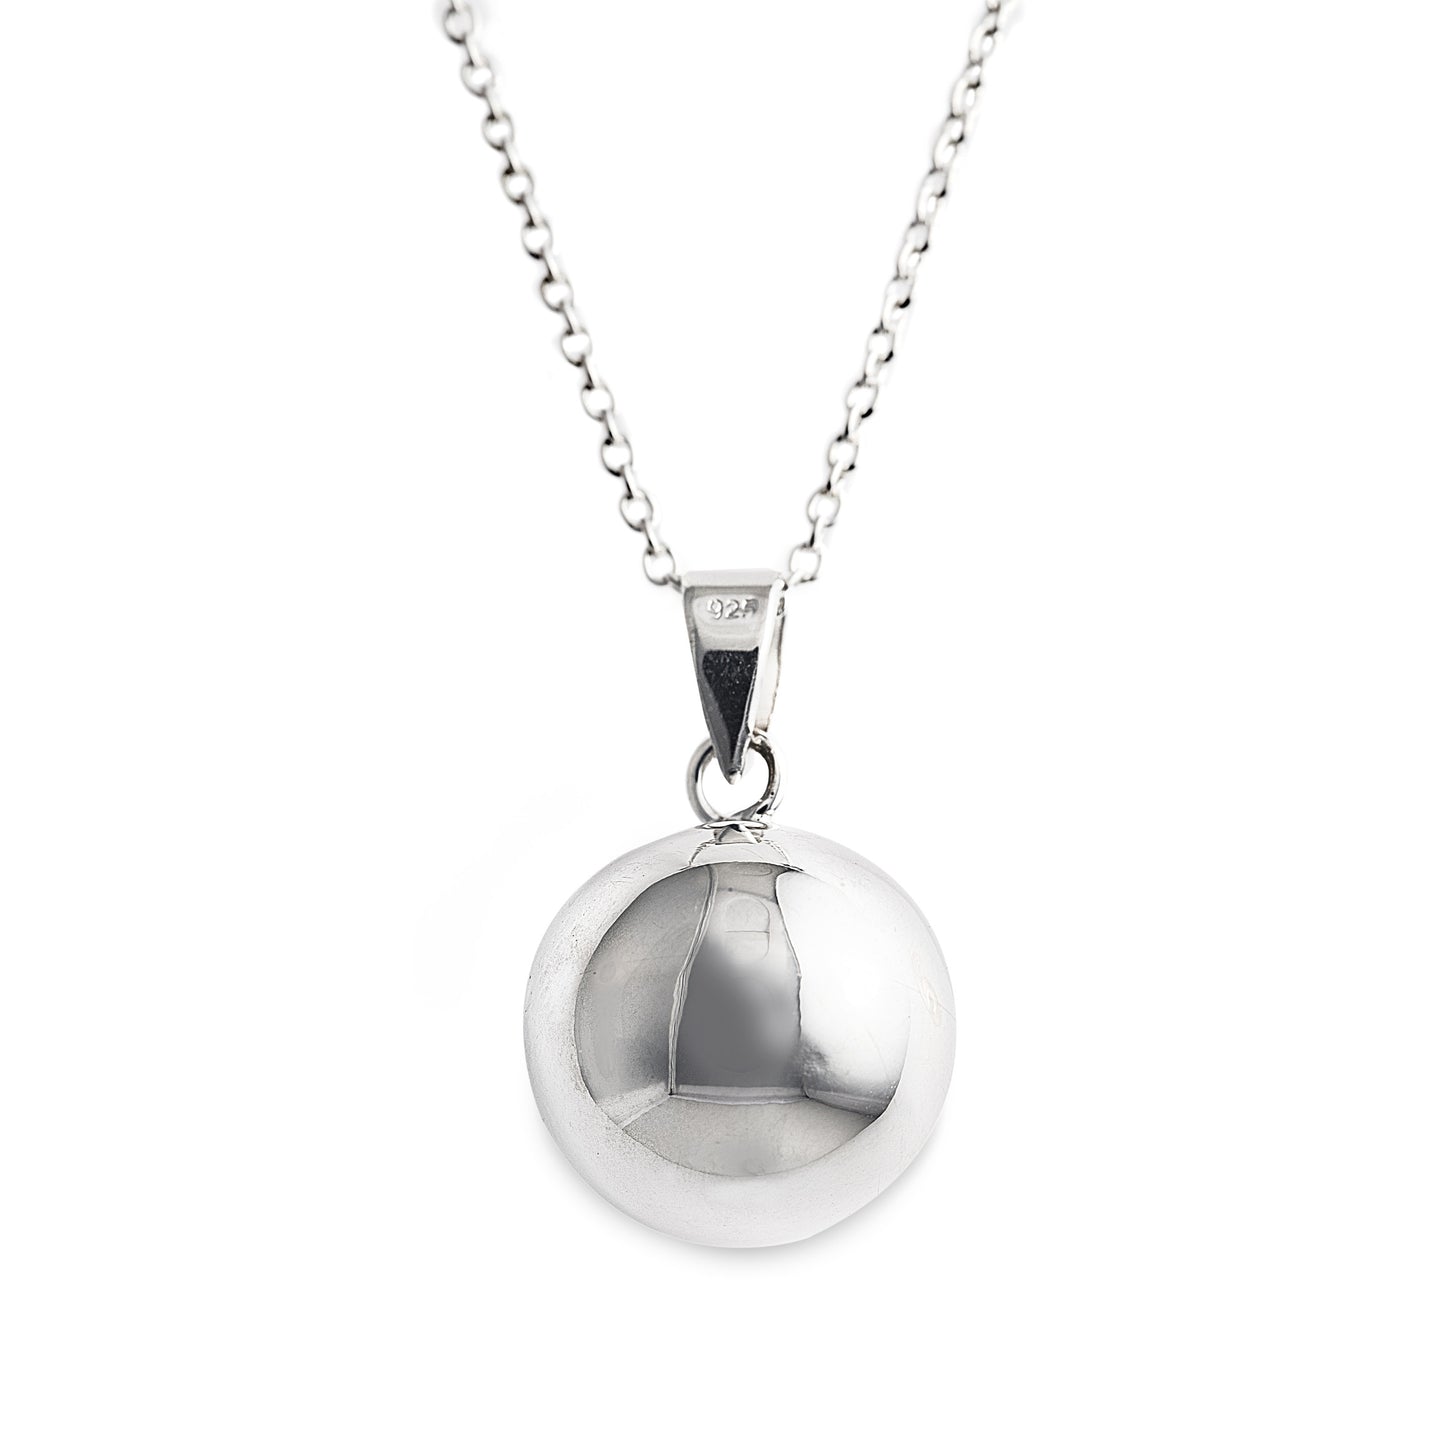 Large Villa Necklace Ball Pendant in 925 sterling silver with a fine silver chain. Worldwide shipping. Jewellery by Bellagio & Co.